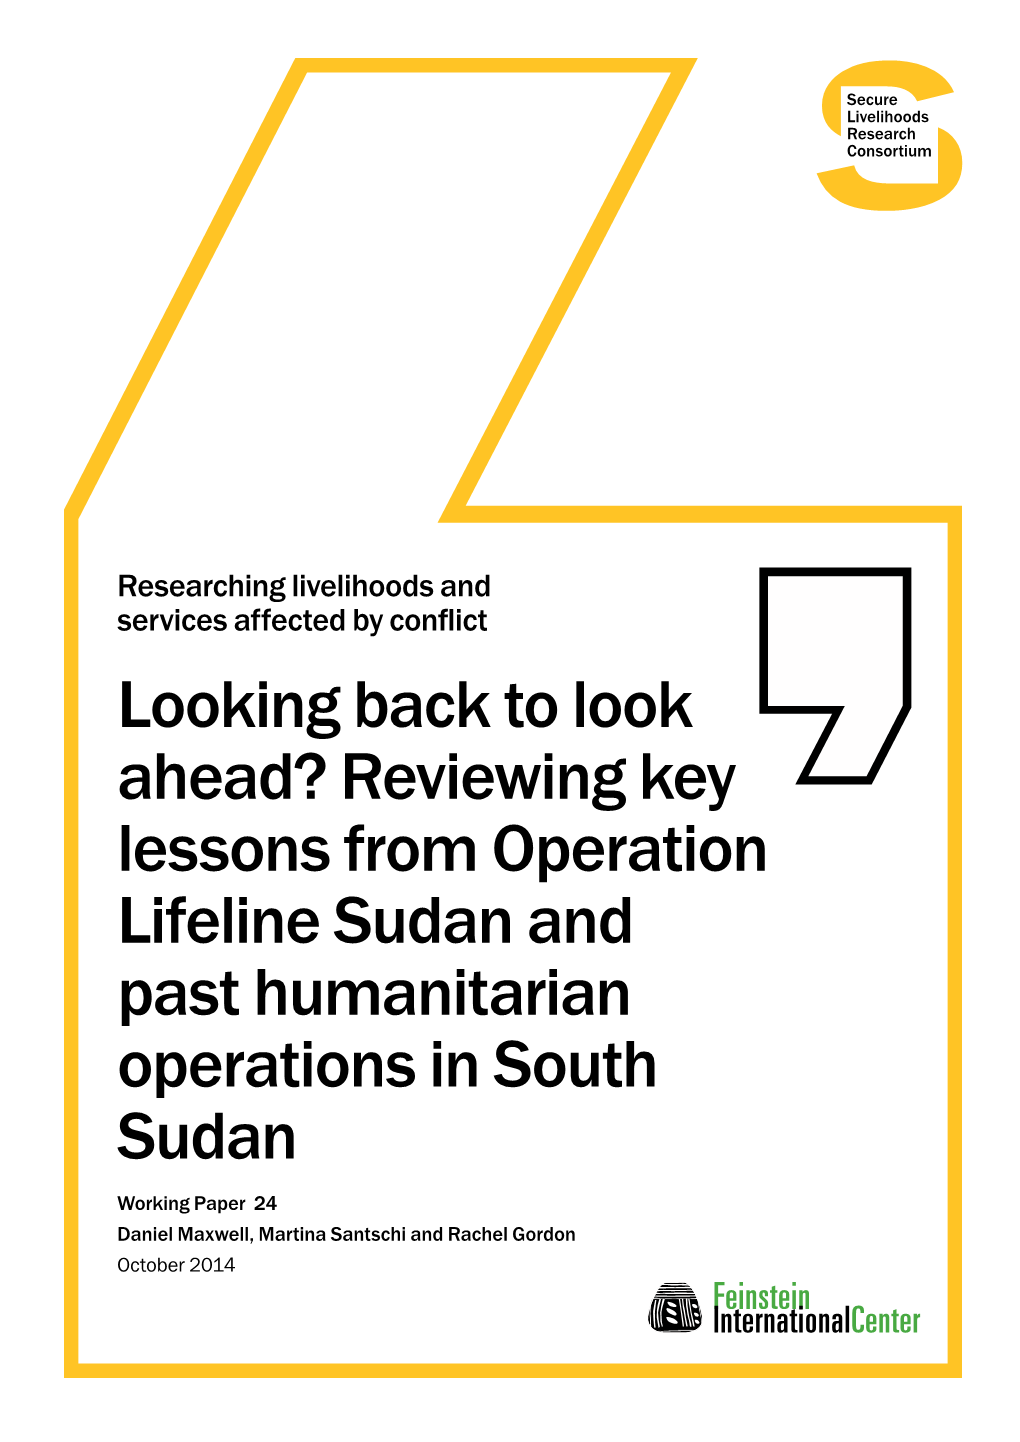 Reviewing Key Lessons from Operation Lifeline Sudan and Past